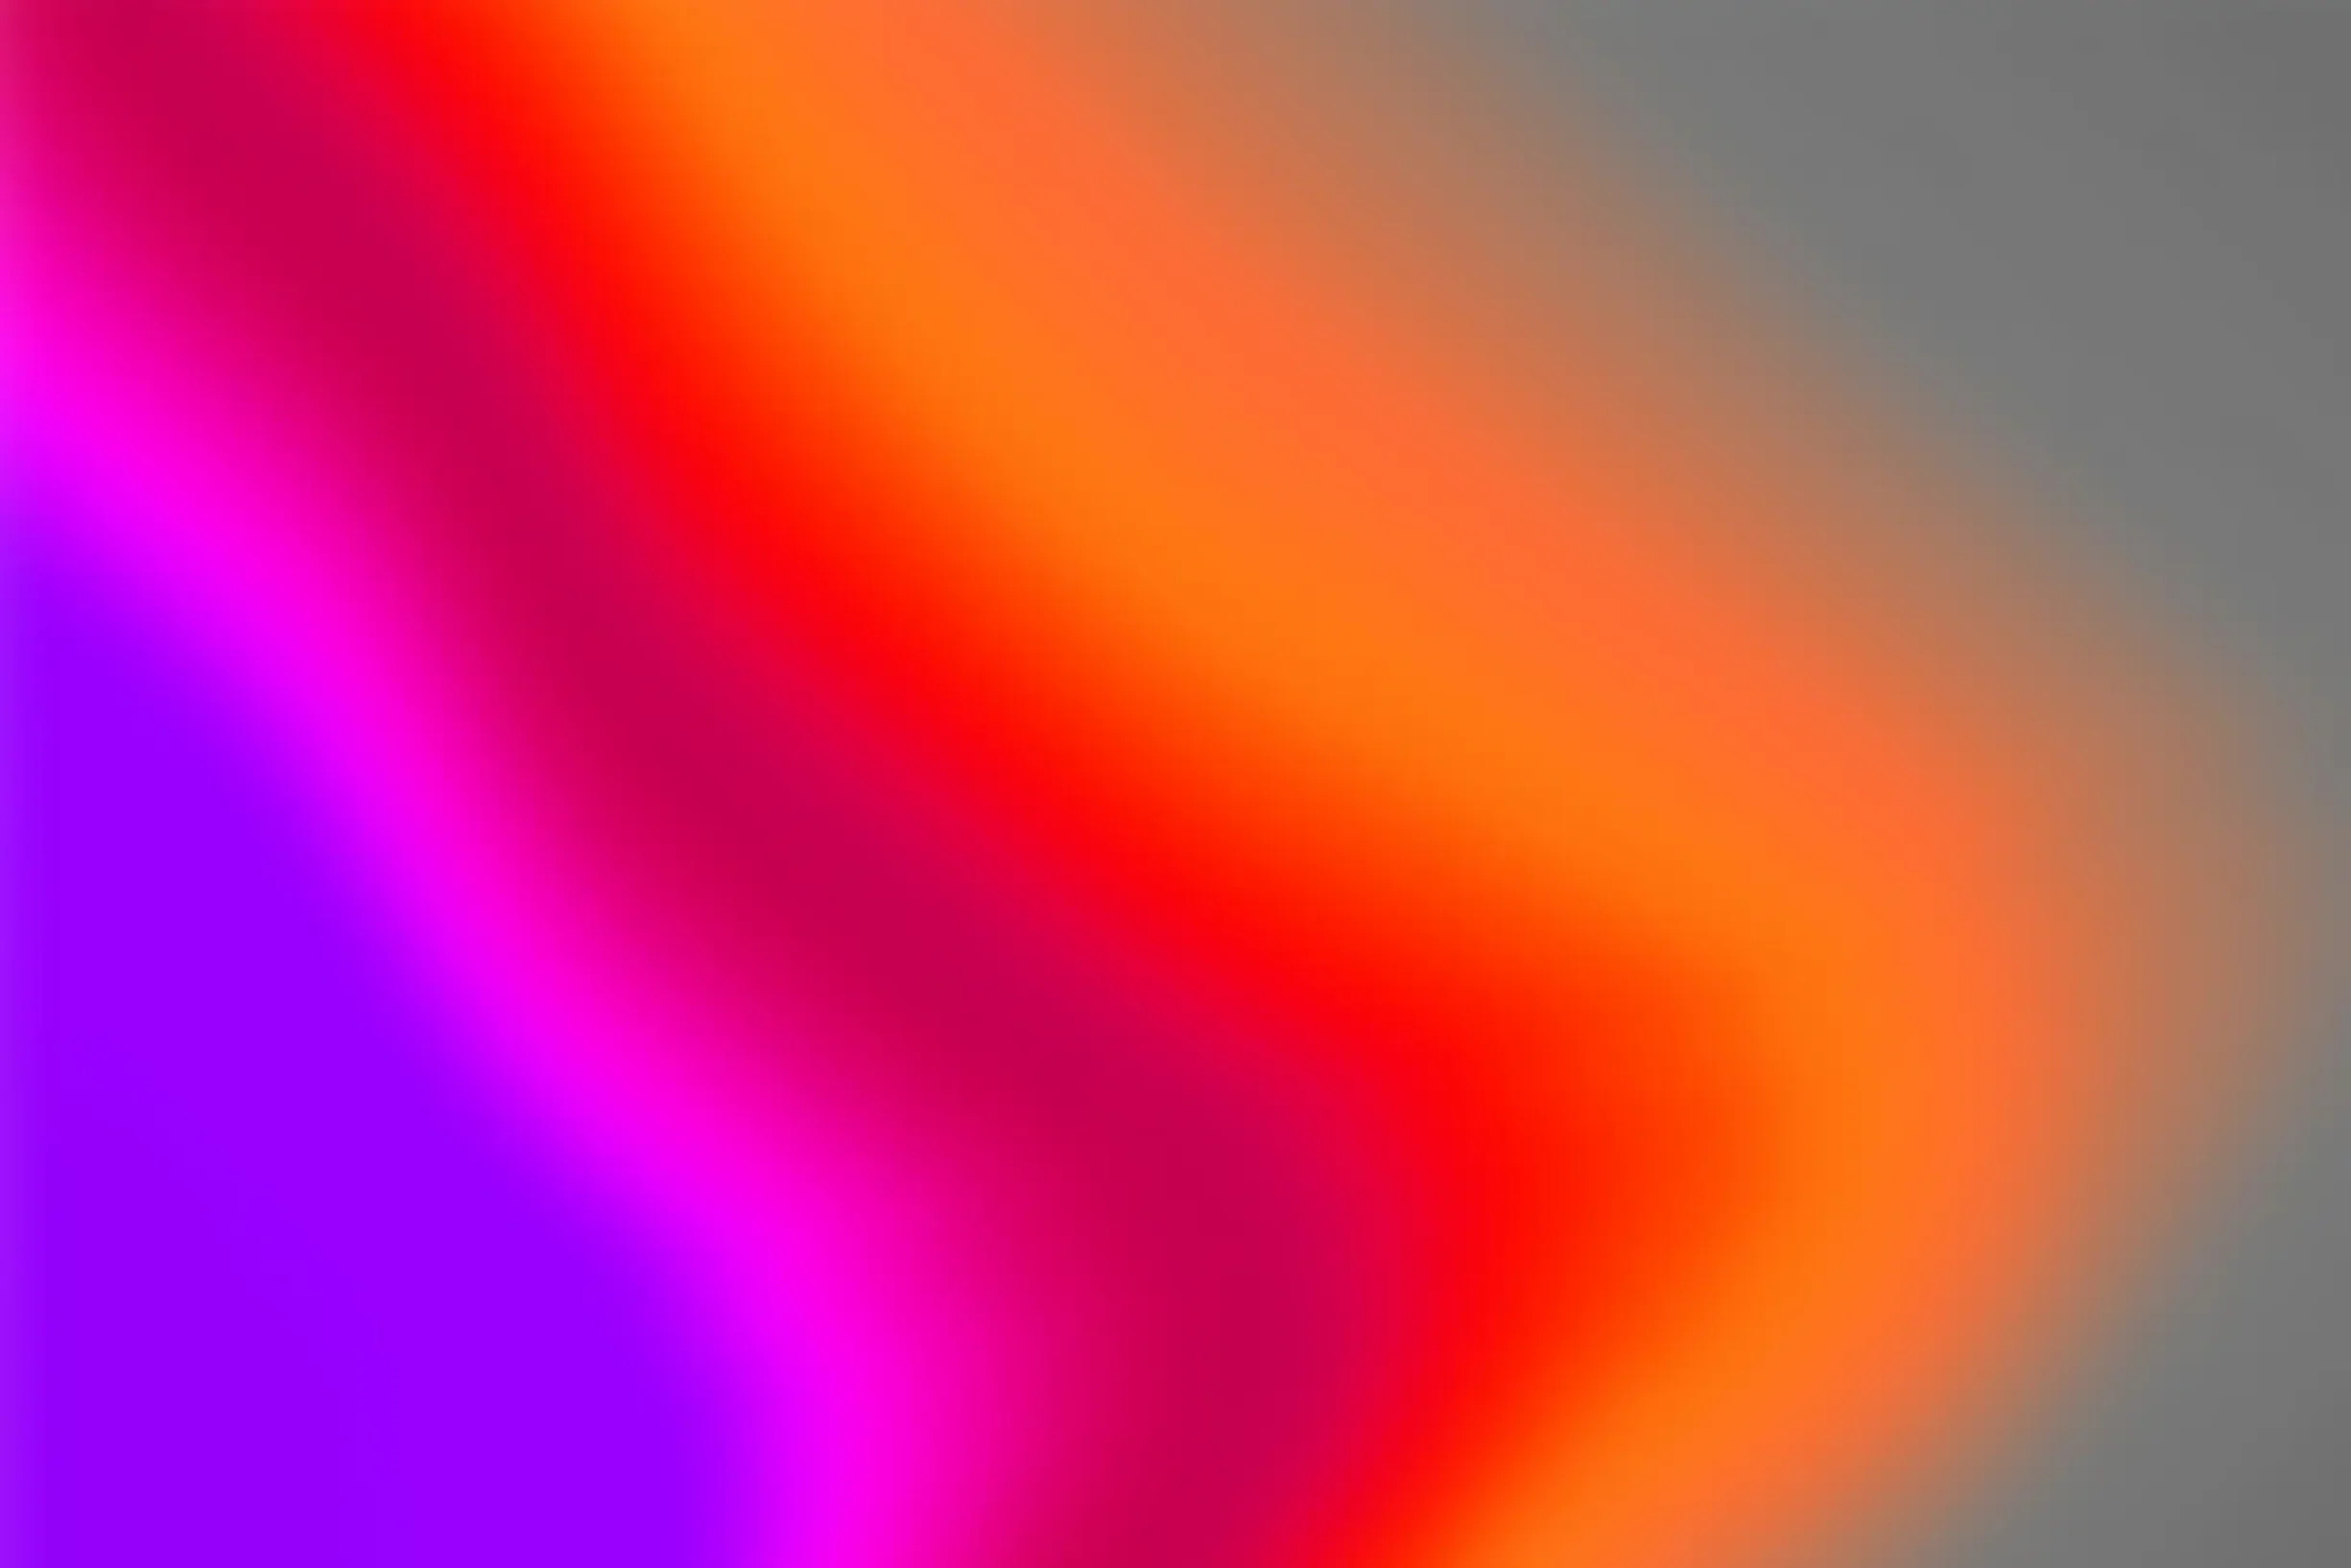 A soft gradient passing through sahdes of blue, violet, red, and orange